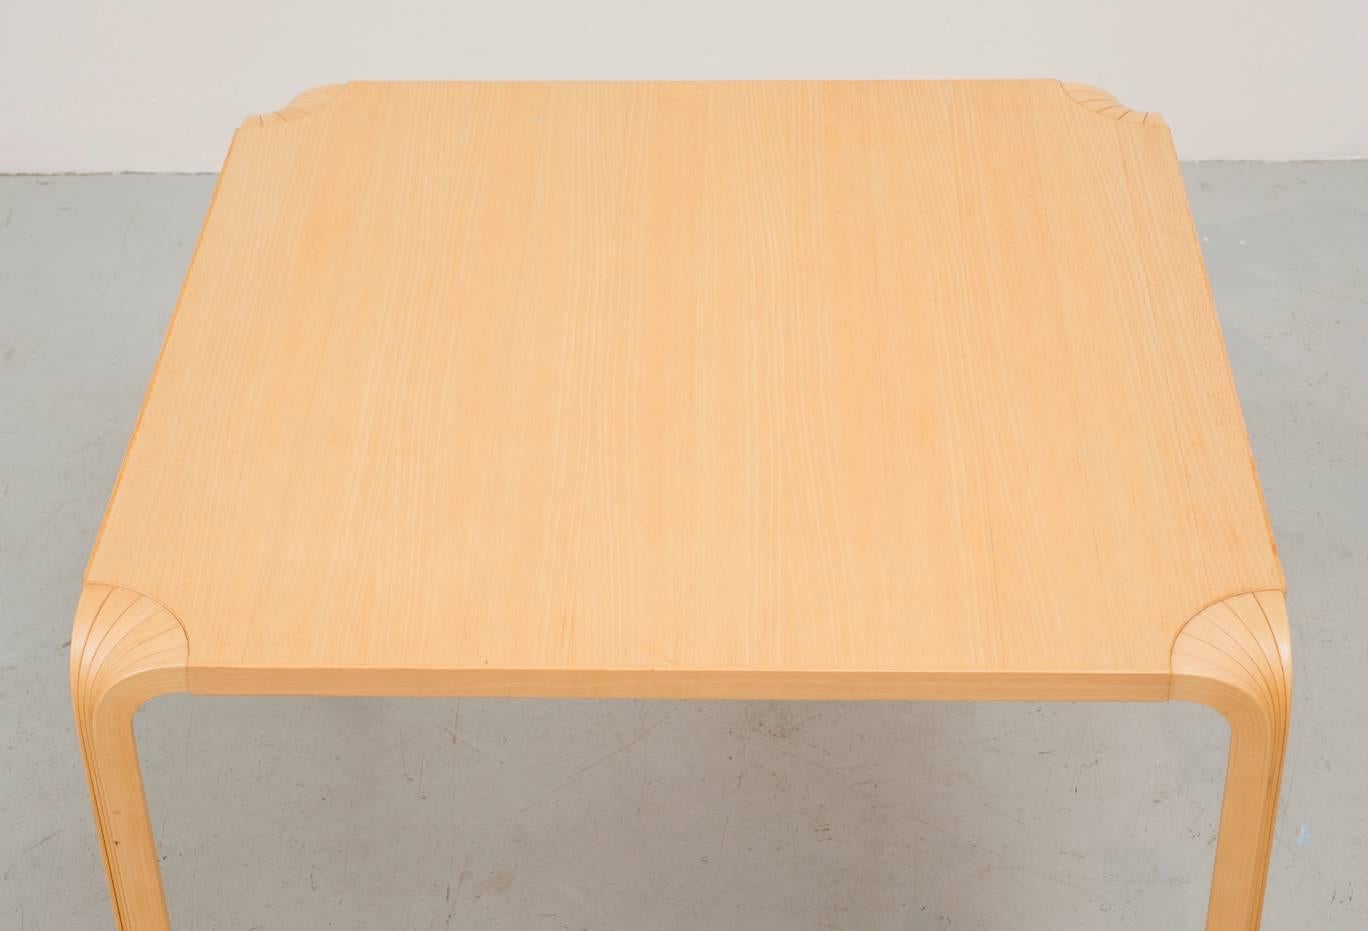 Fan leg dining table by Alvar Aalto for Artek, circa 1950. Ash top and fluted birch legs which fan to meet the top.